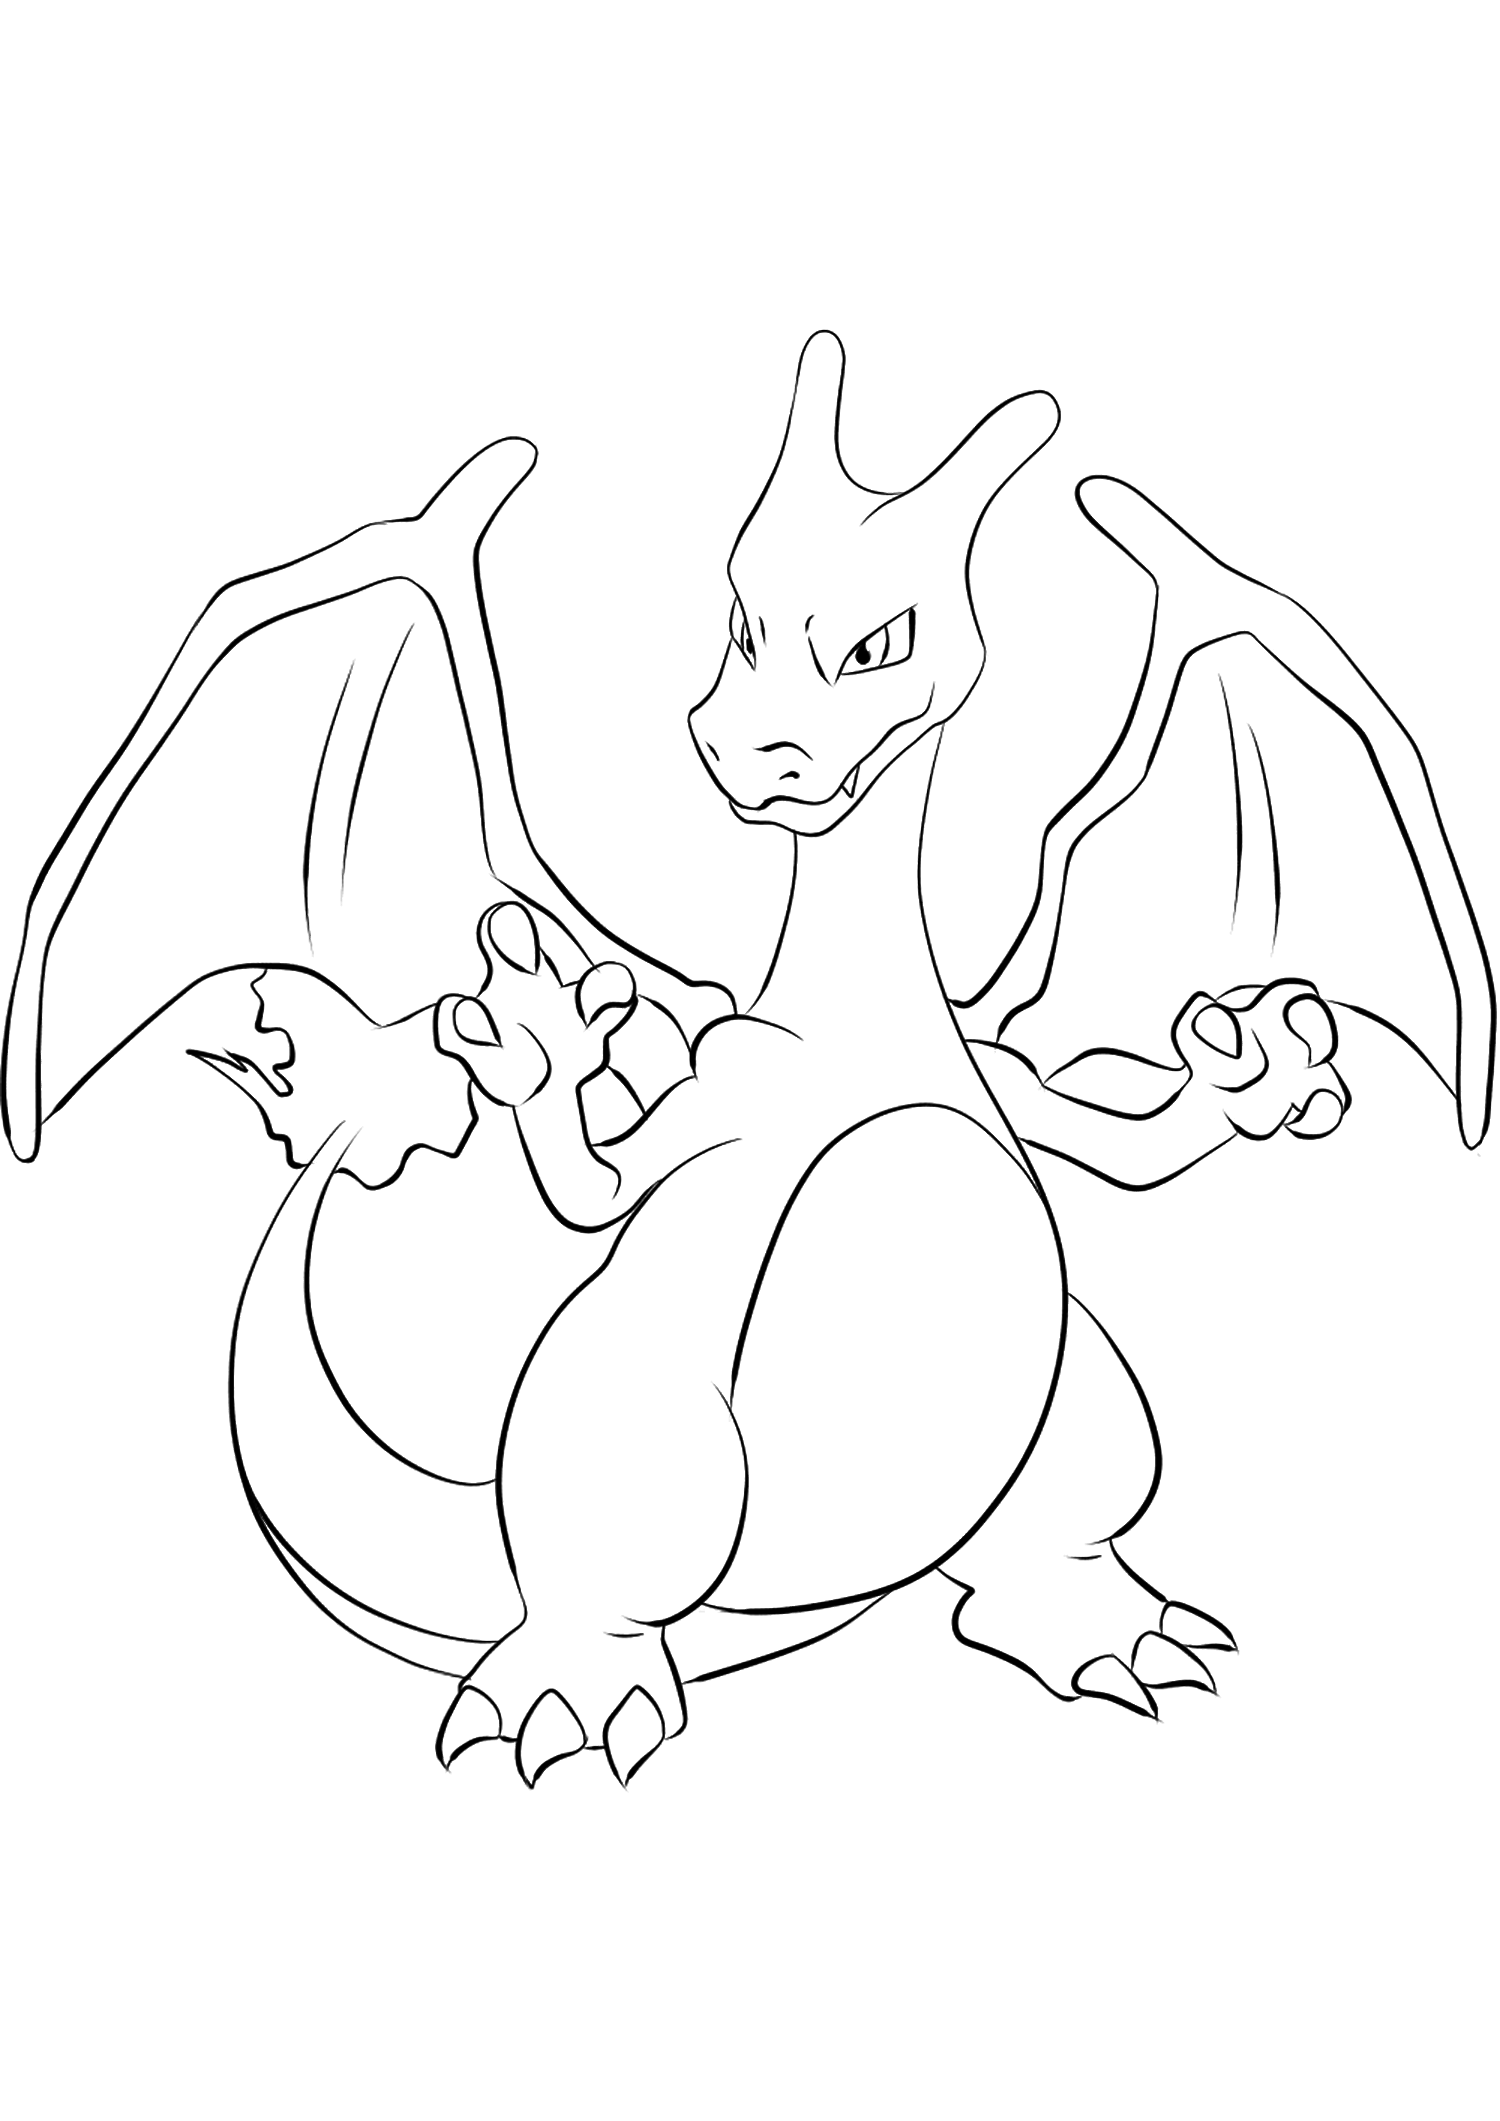 charizard no 06 pokemon generation i all pokemon coloring pages kids coloring pages